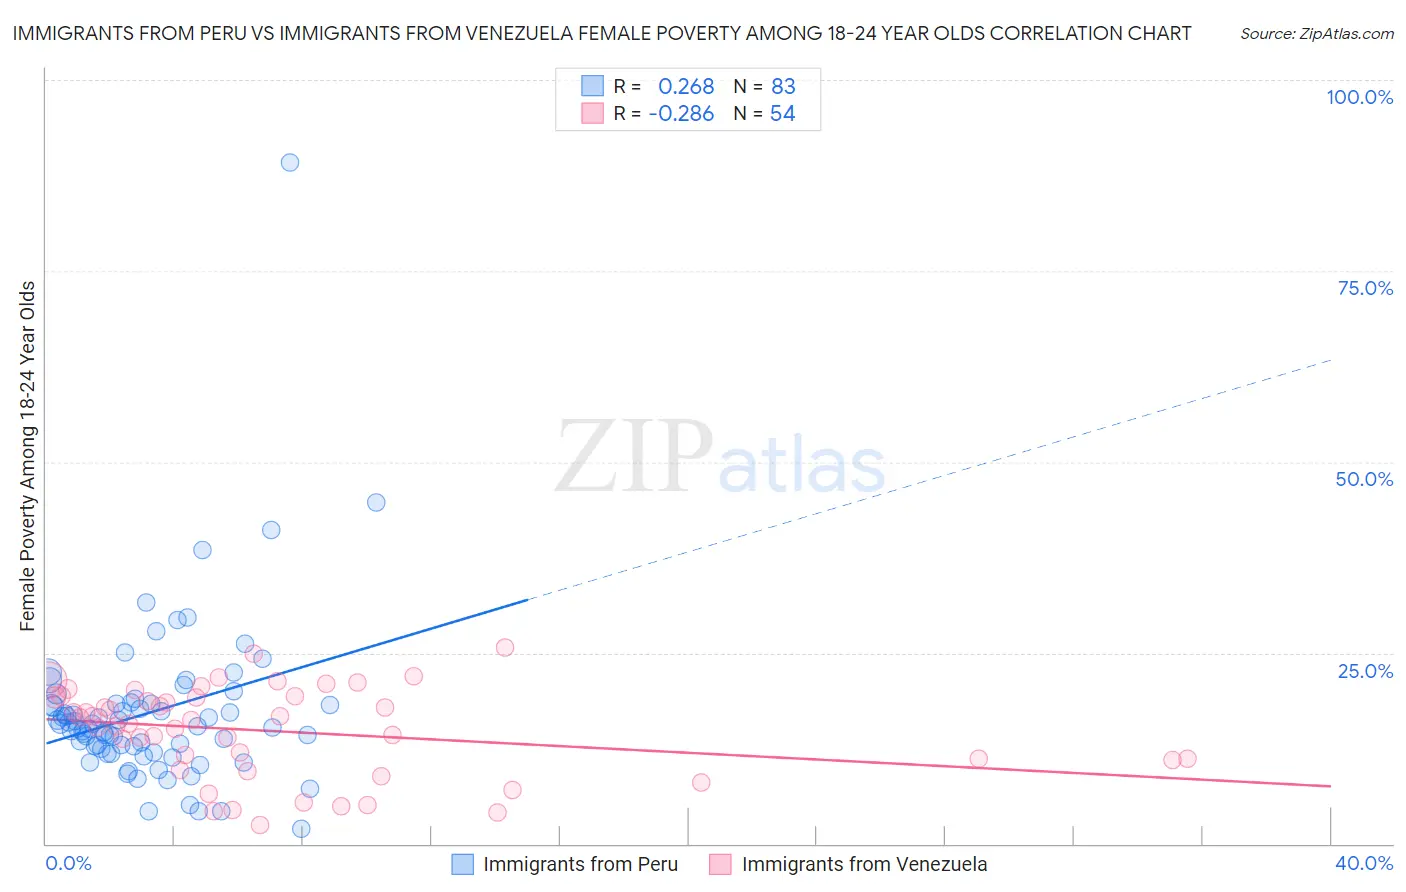 Immigrants from Peru vs Immigrants from Venezuela Female Poverty Among 18-24 Year Olds